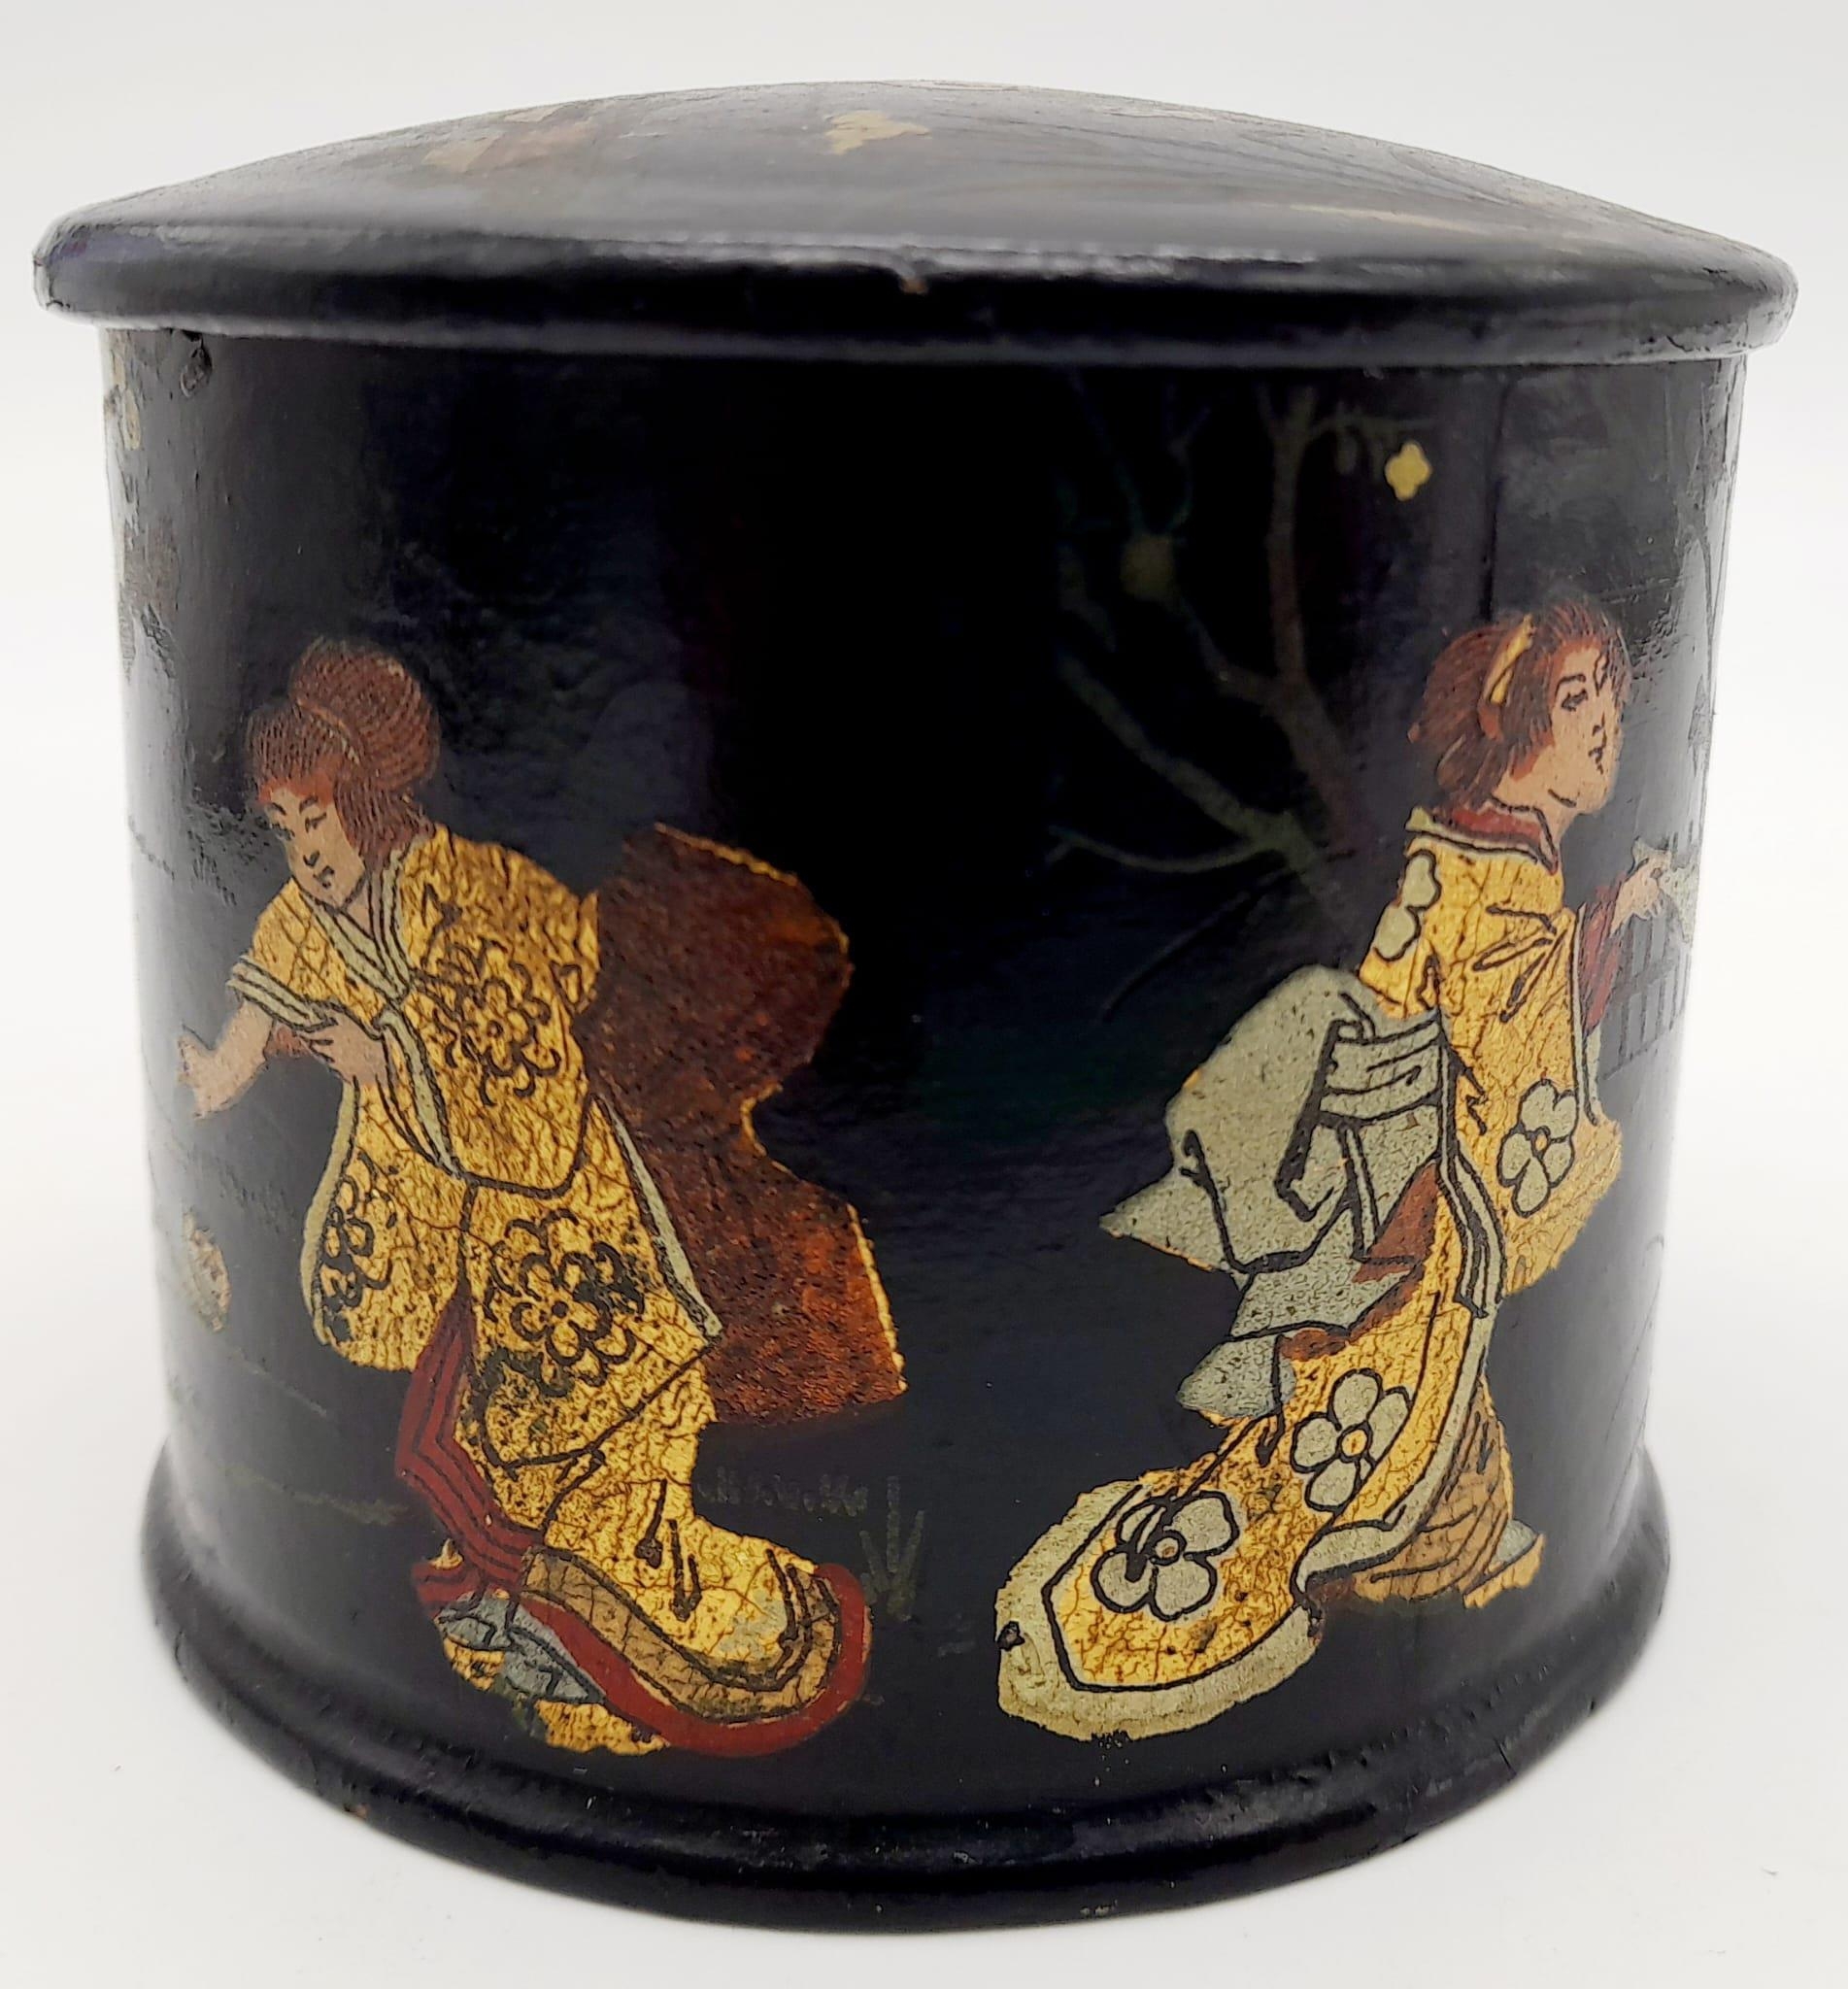 An Antique Chinese Black Lacquer Box. Wonderful decoration with gold on black depicting Mothers at - Image 4 of 7